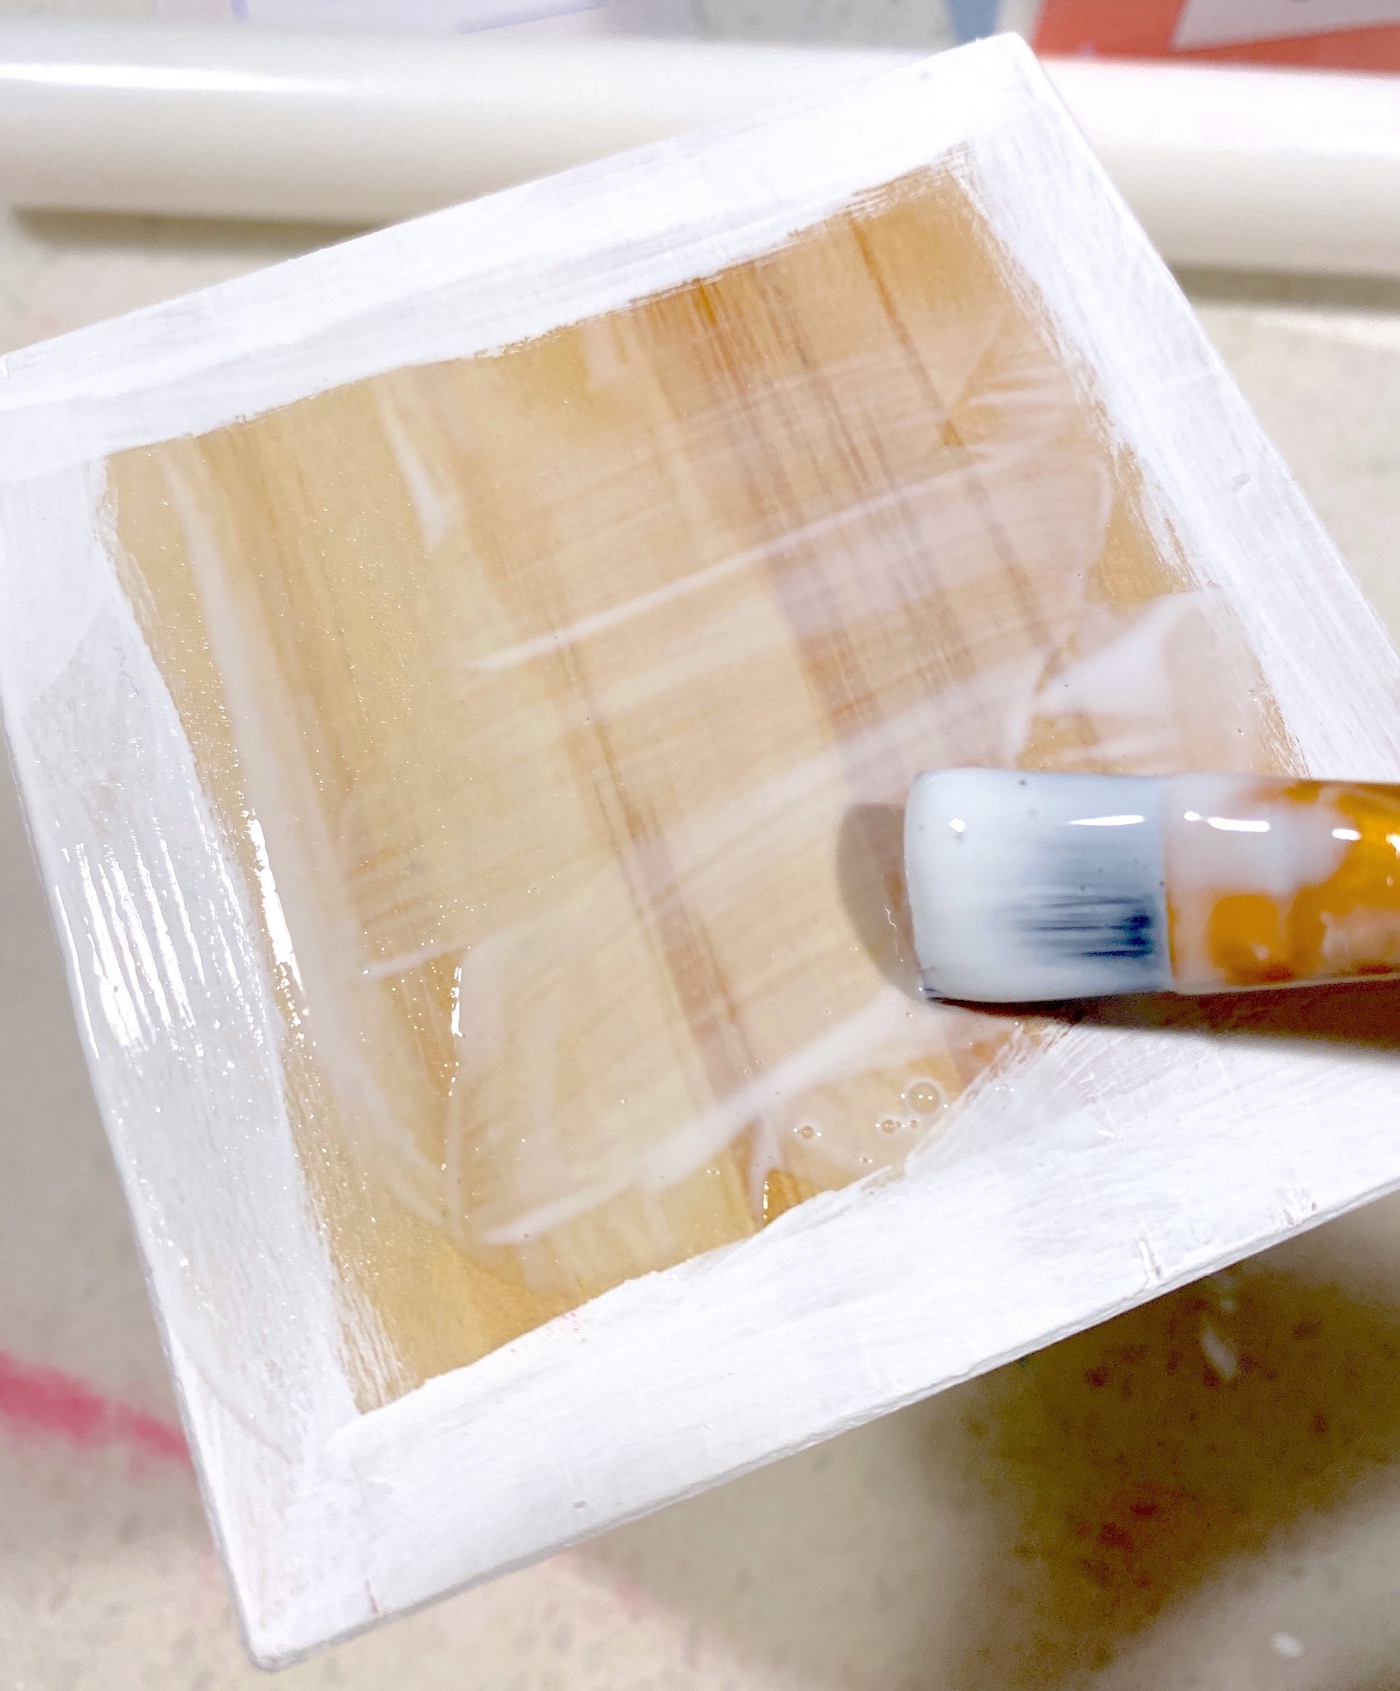 Applying decoupage medium to a side of a wood block with a paintbrush